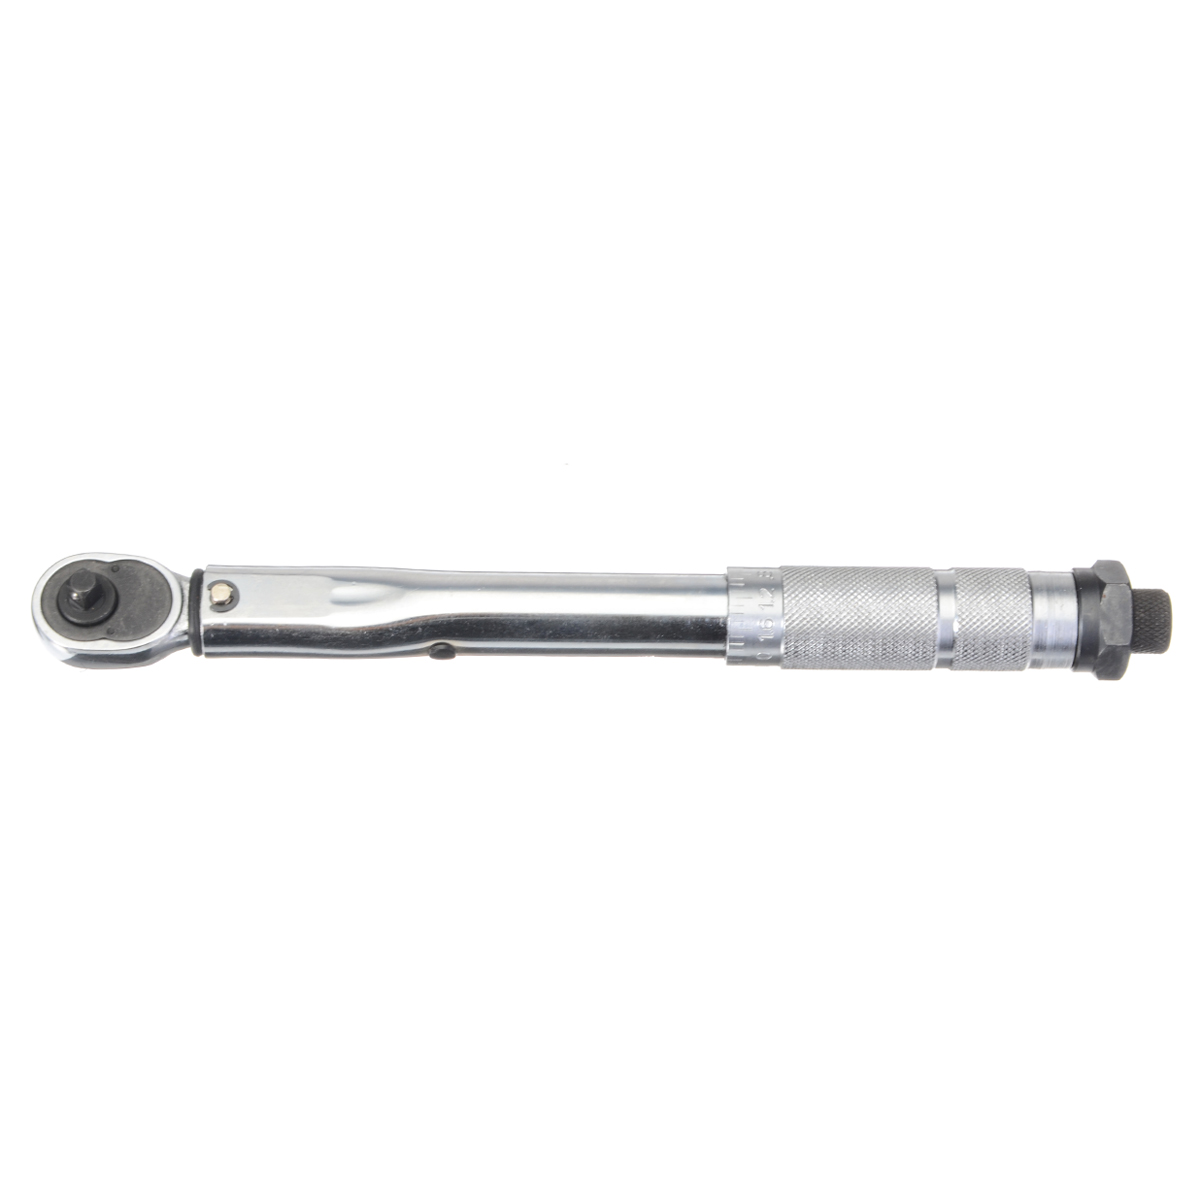 14-5-25NM-Torque-Wrench-Adjustable-Torque-Wrench-Hand-Spanner-For-Repairing-Tool-1225666